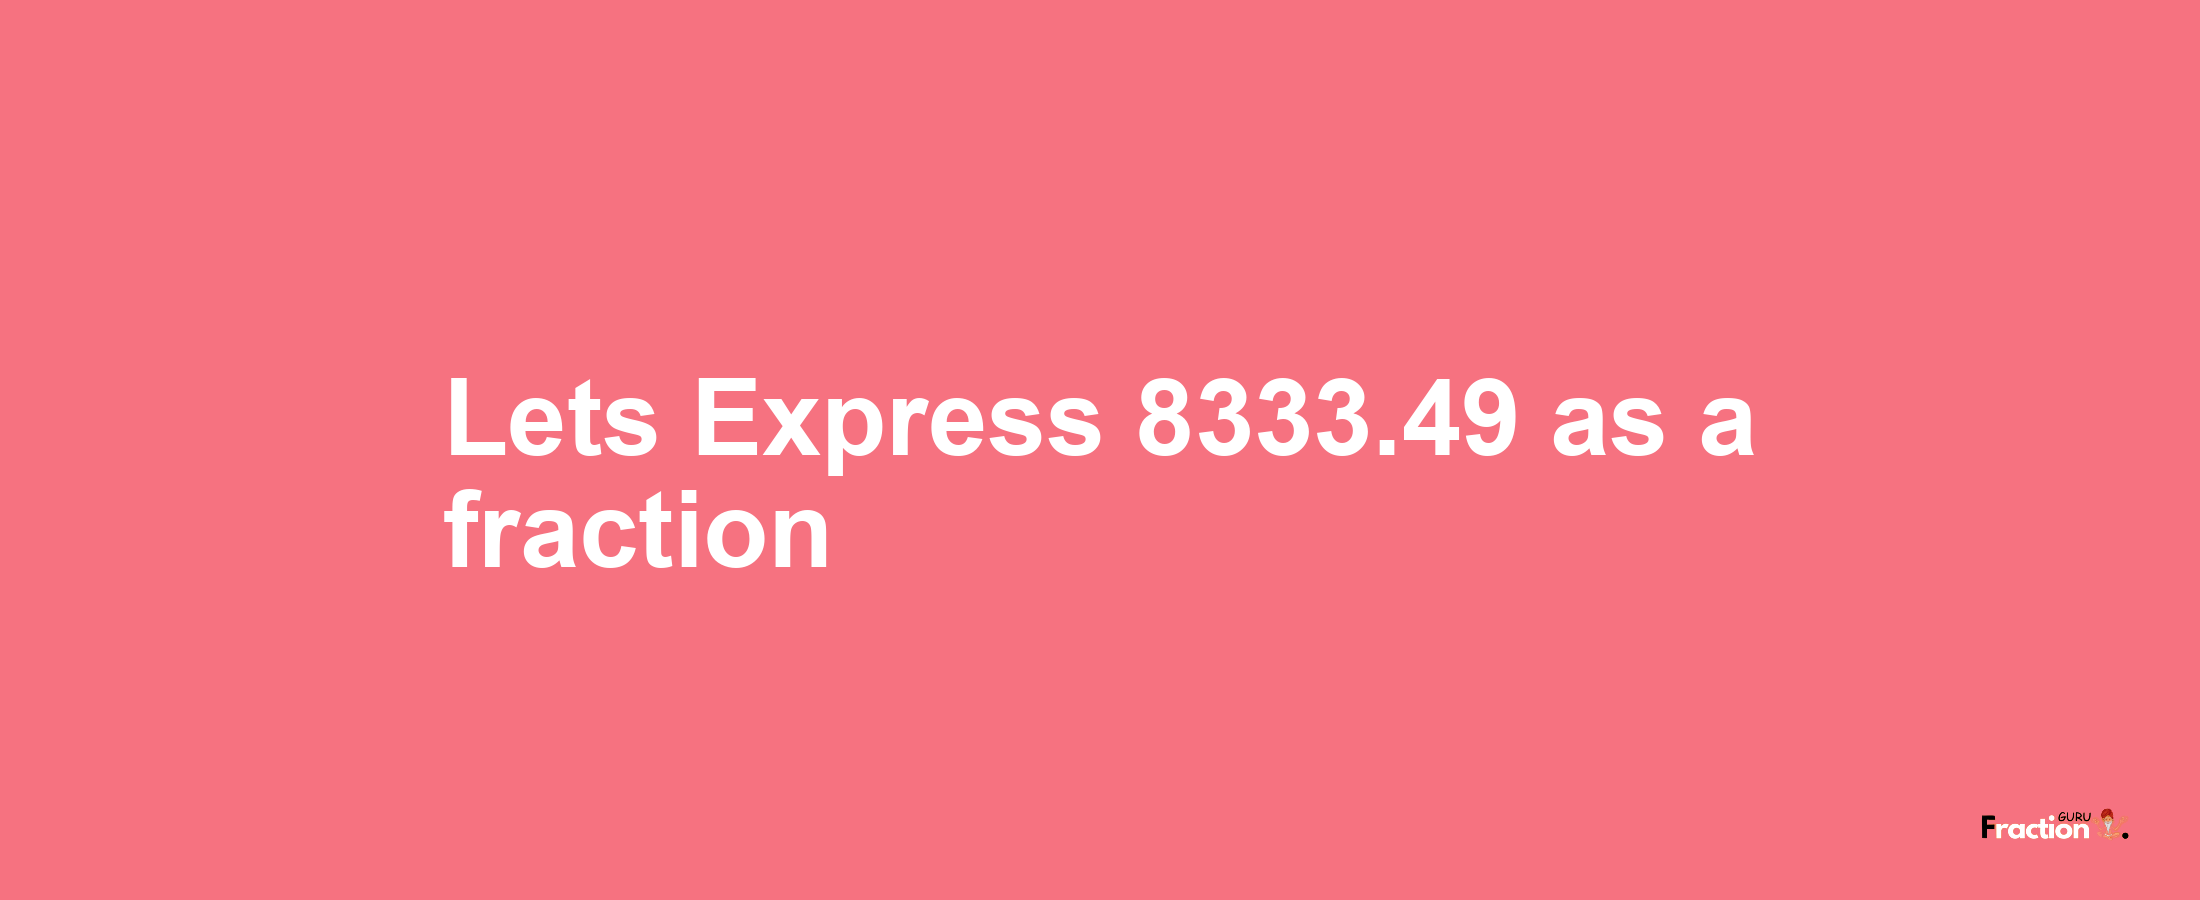 Lets Express 8333.49 as afraction